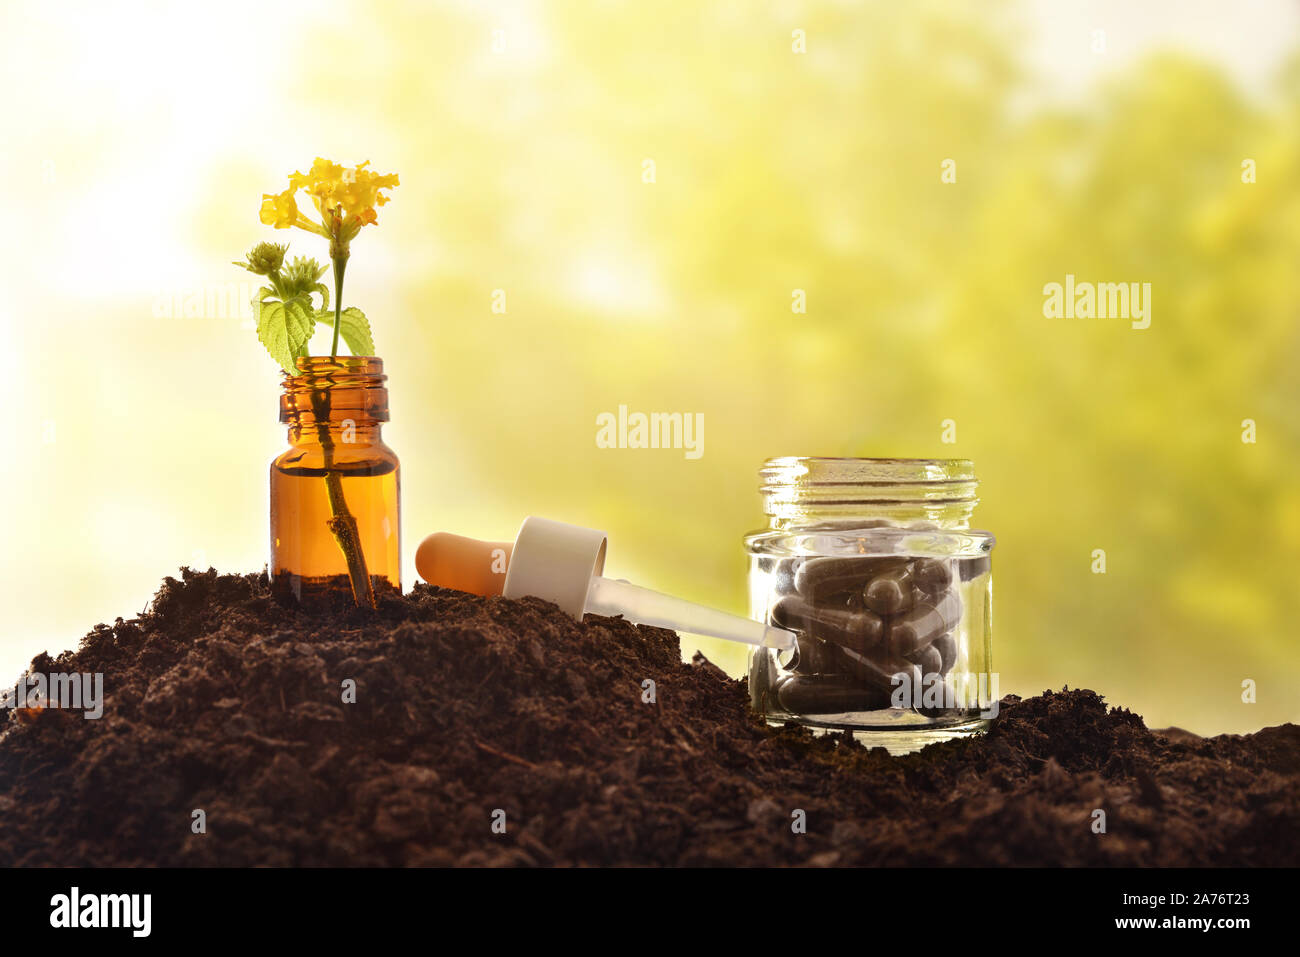 Glass jar with plant with yellow flower inside and pot with capsules on soil and green nature background. Alternative natural medicine concept. Front Stock Photo